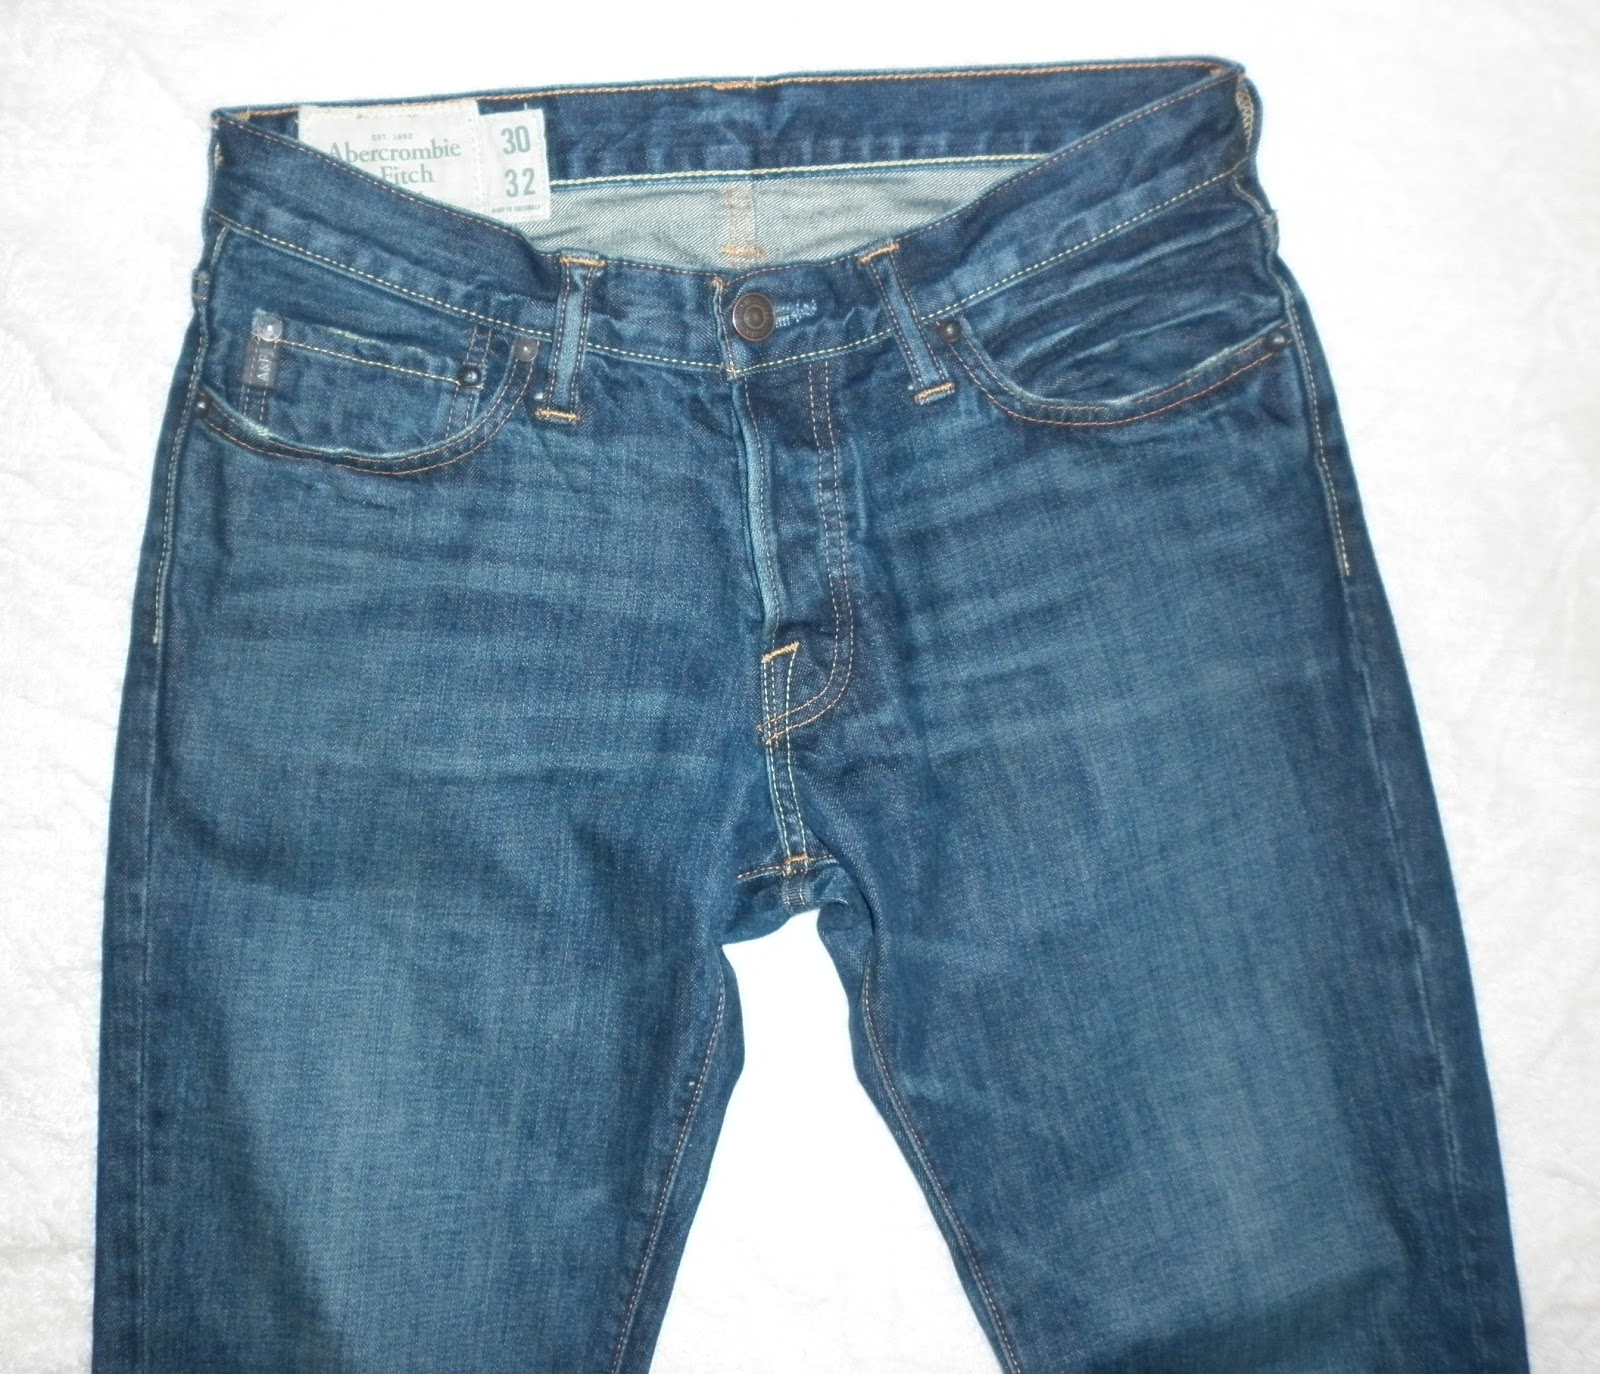 bundle ofNever: Abercrombie & Fitch Jeans - Sold